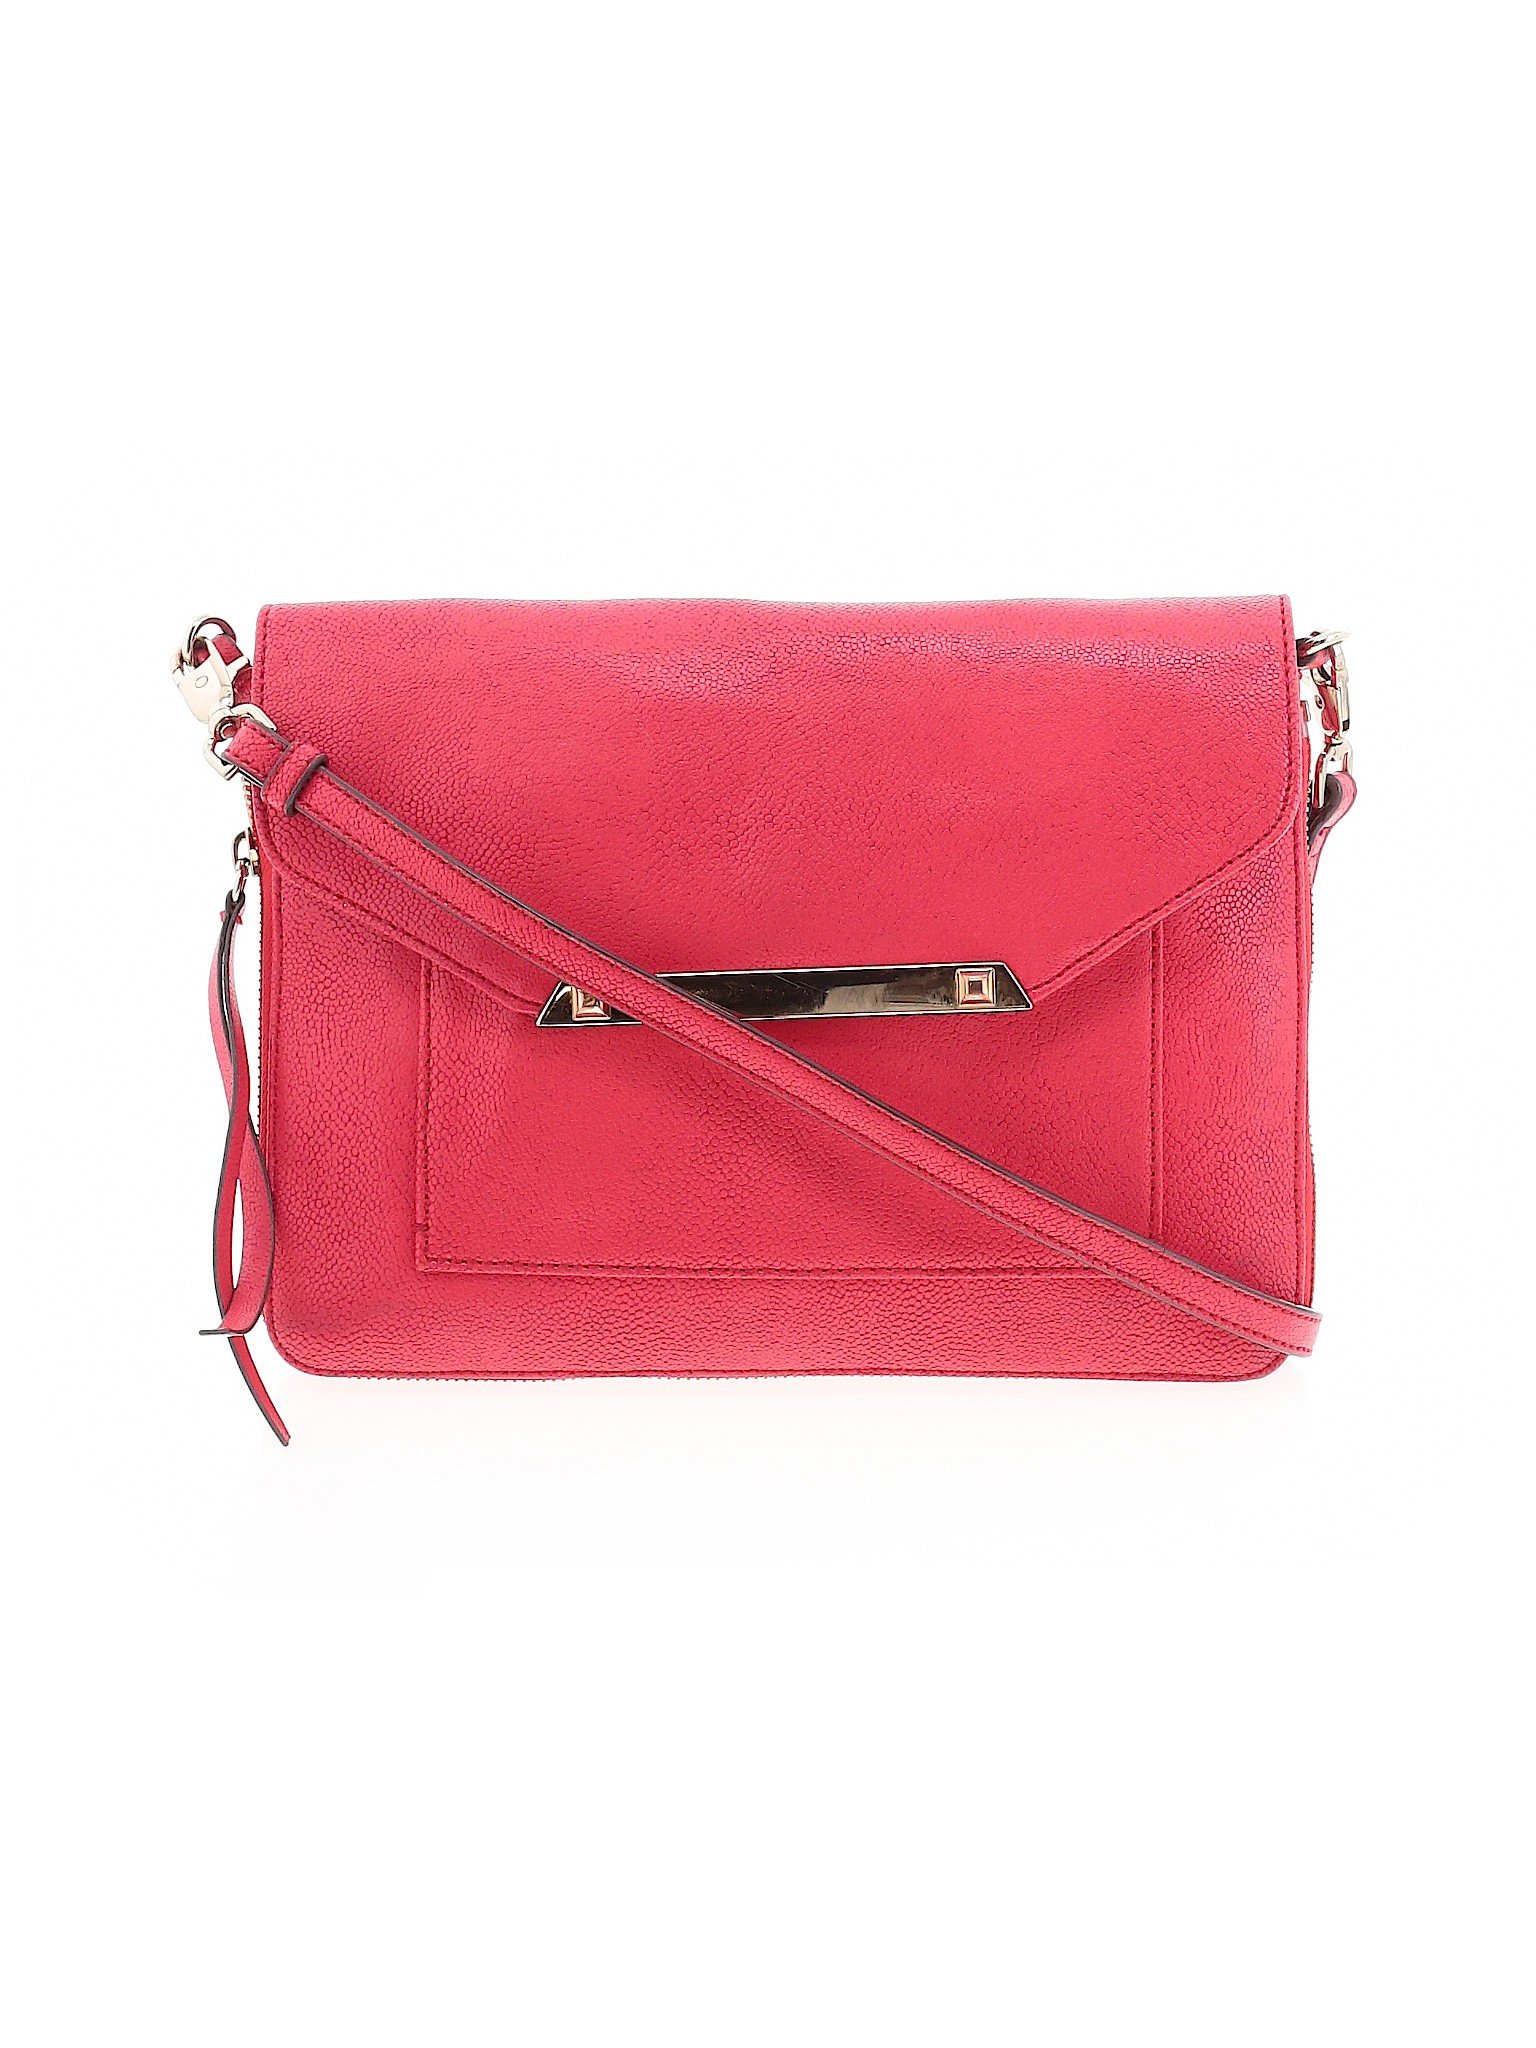 Stella & Dot Solid Red Crossbody Bag One Size - 63% off | thredUP